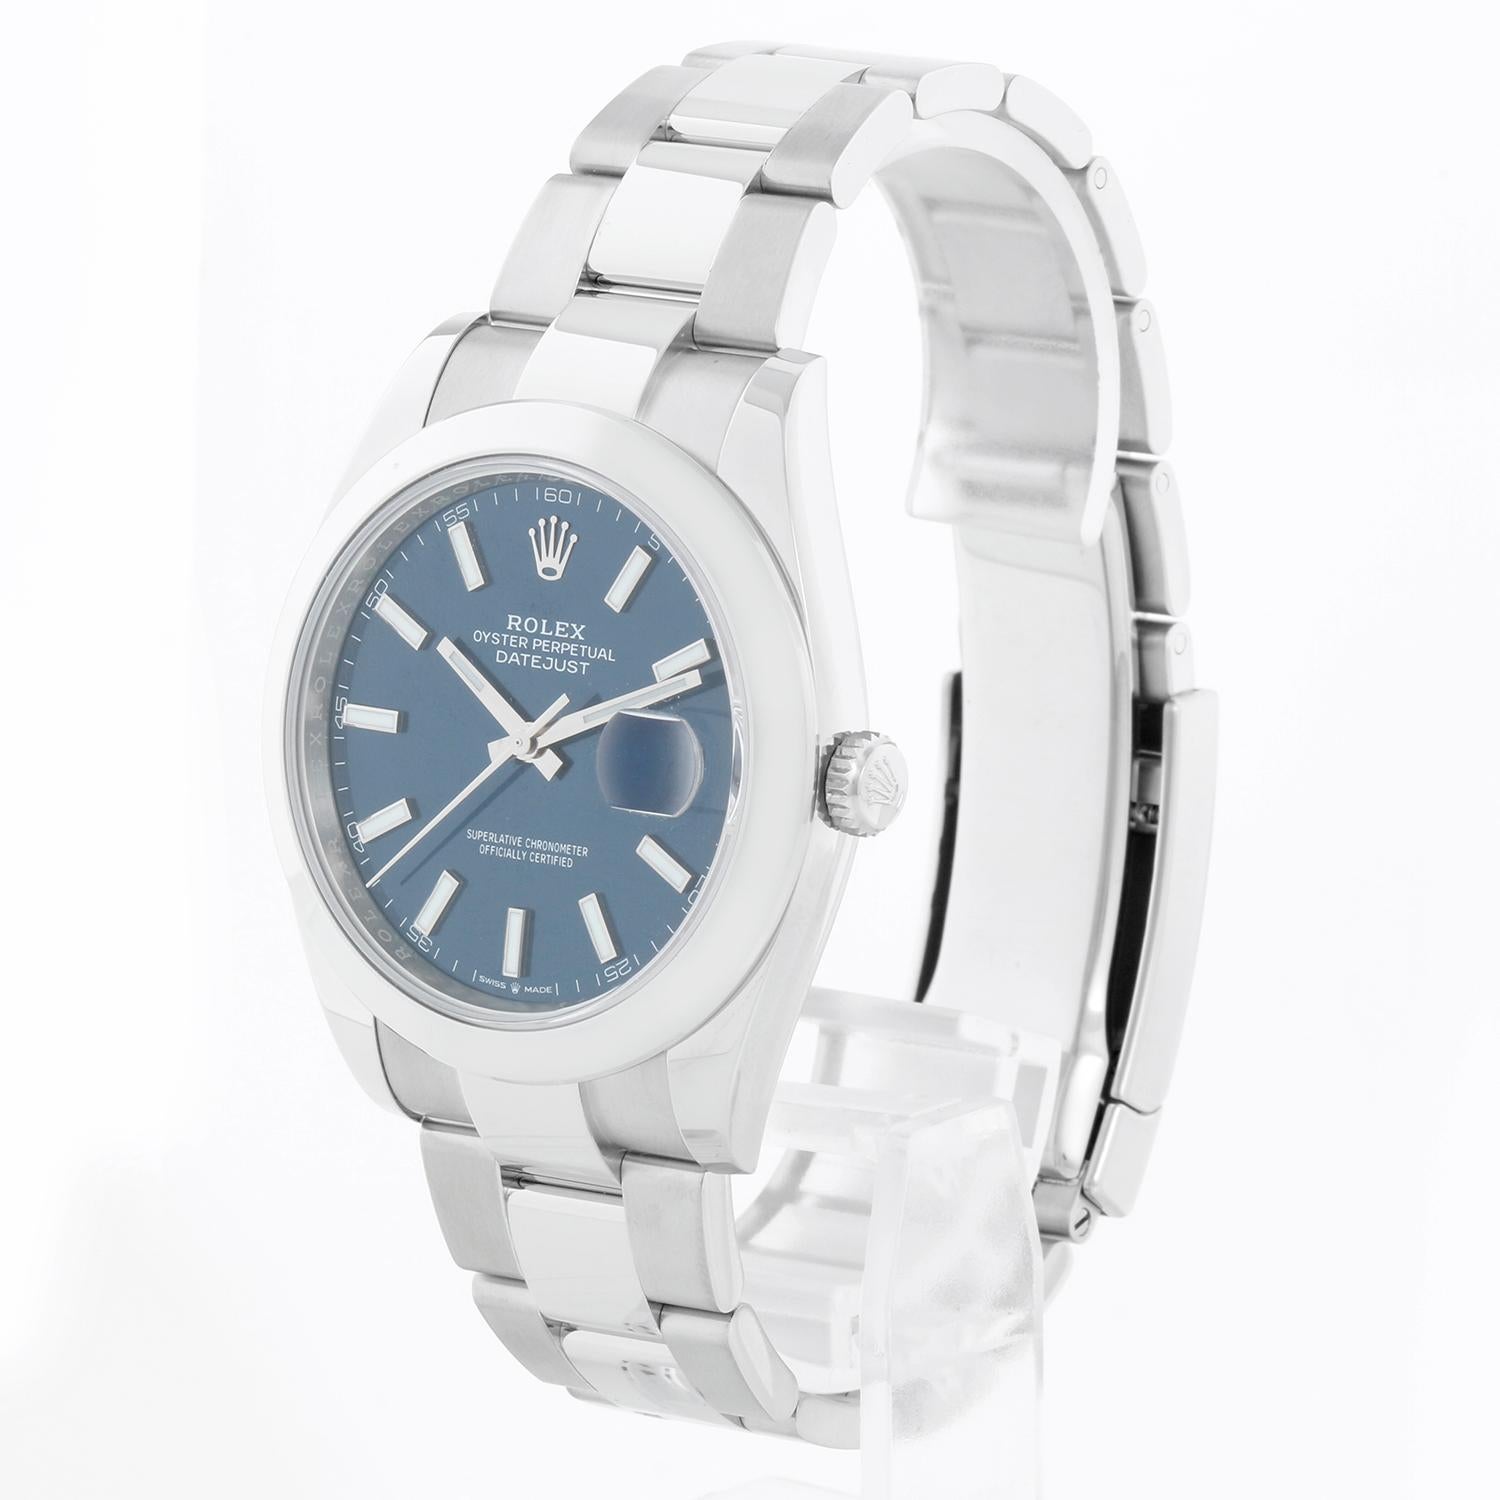 Rolex Datejust II Men's 41mm Stainless Steel 126300 - Automatic winding, sapphire crystal. Stainless steel case (41mm diameter). Blue dial with stick hour markers. Stainless steel Oyster bracelet. Pre-owned Rolex box, book and card. Dated 2021